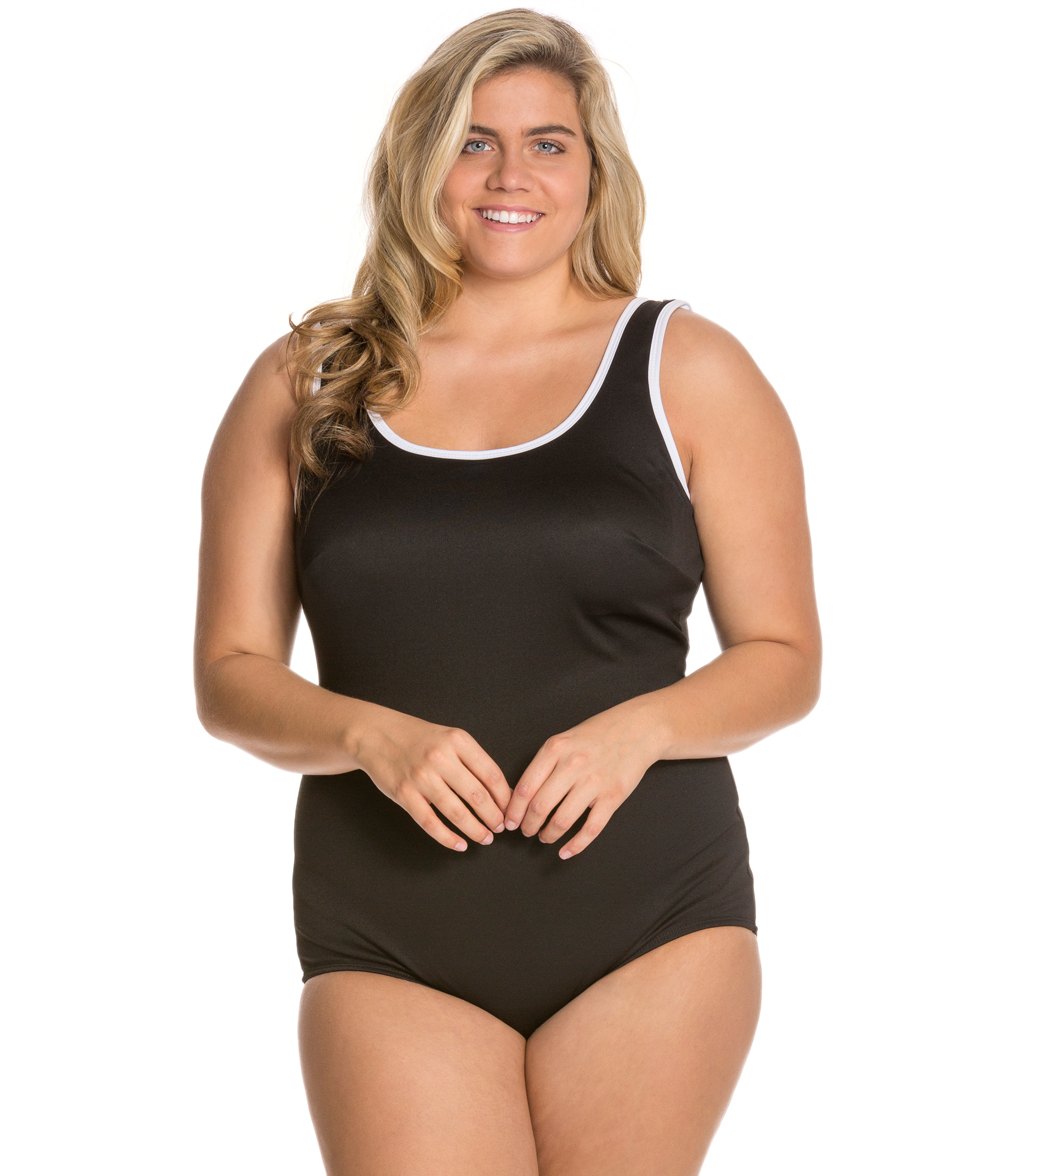 Tuffy Plus Size Chlorine Resistant Polyester Active Tank One Piece Swimsuit - Black 24W - Swimoutlet.com